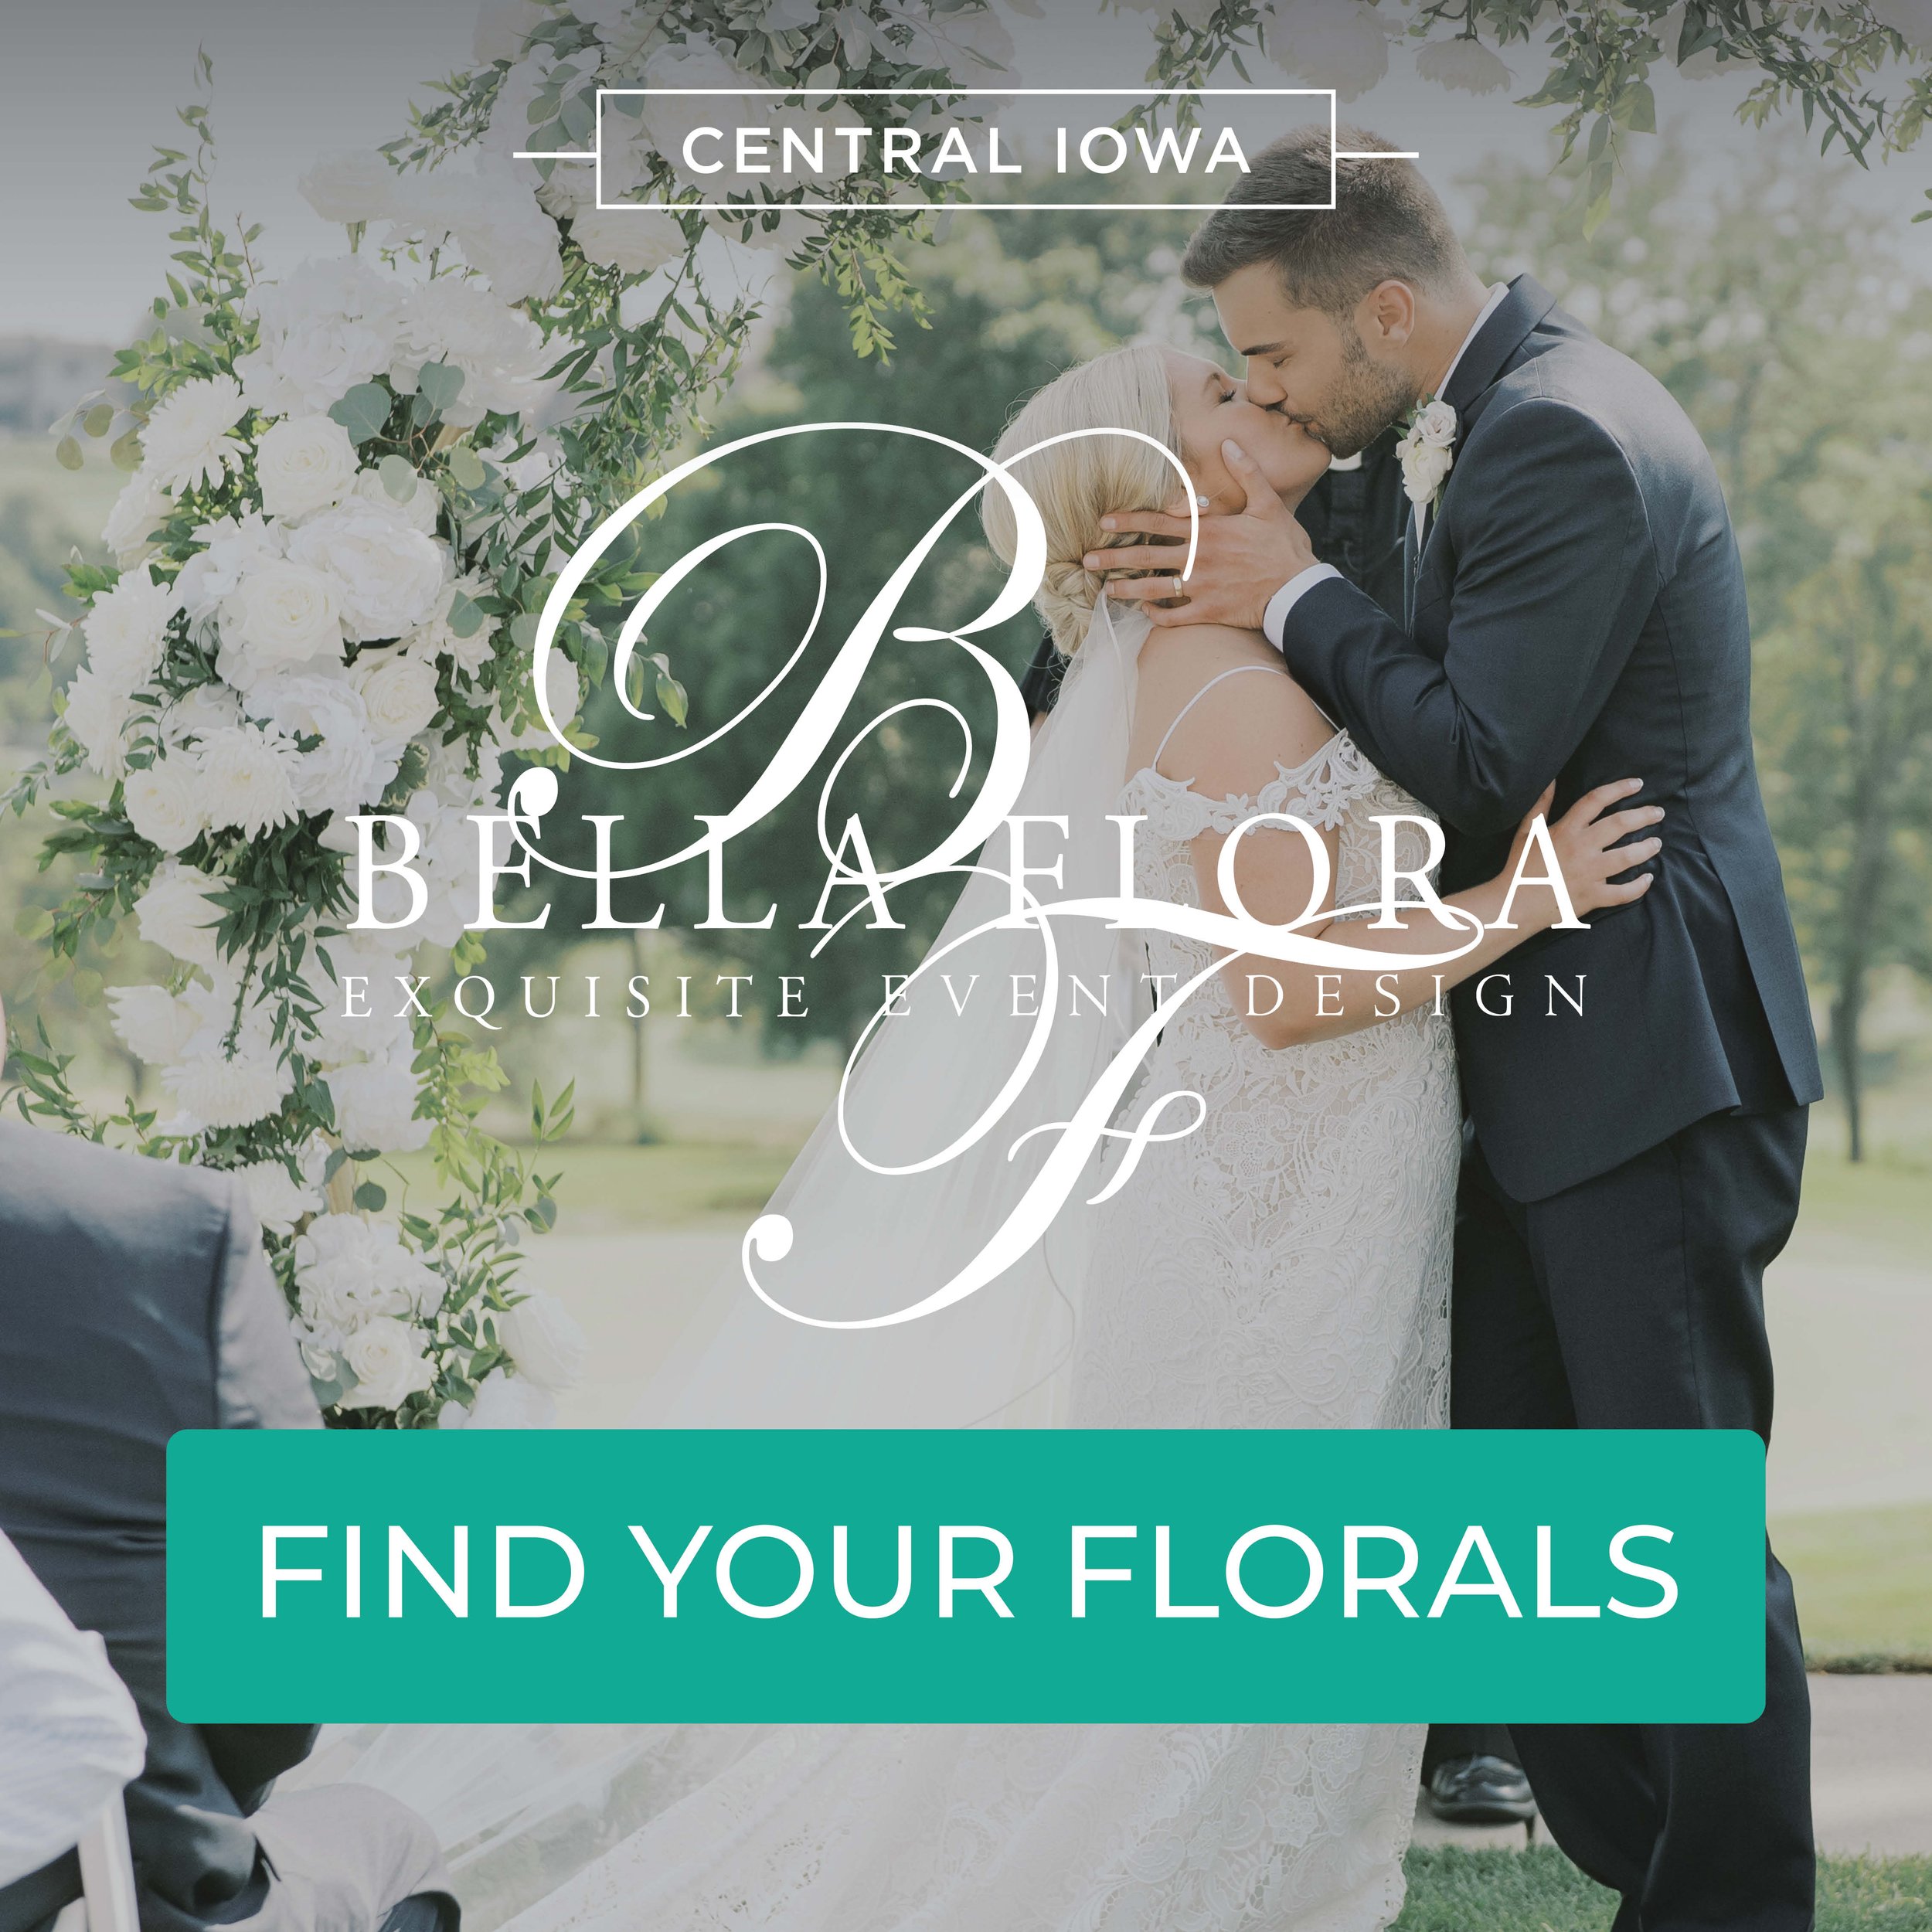 Des Moines & Central Iowa Wedding and Event Florist, Baron & Bell Floral  Design